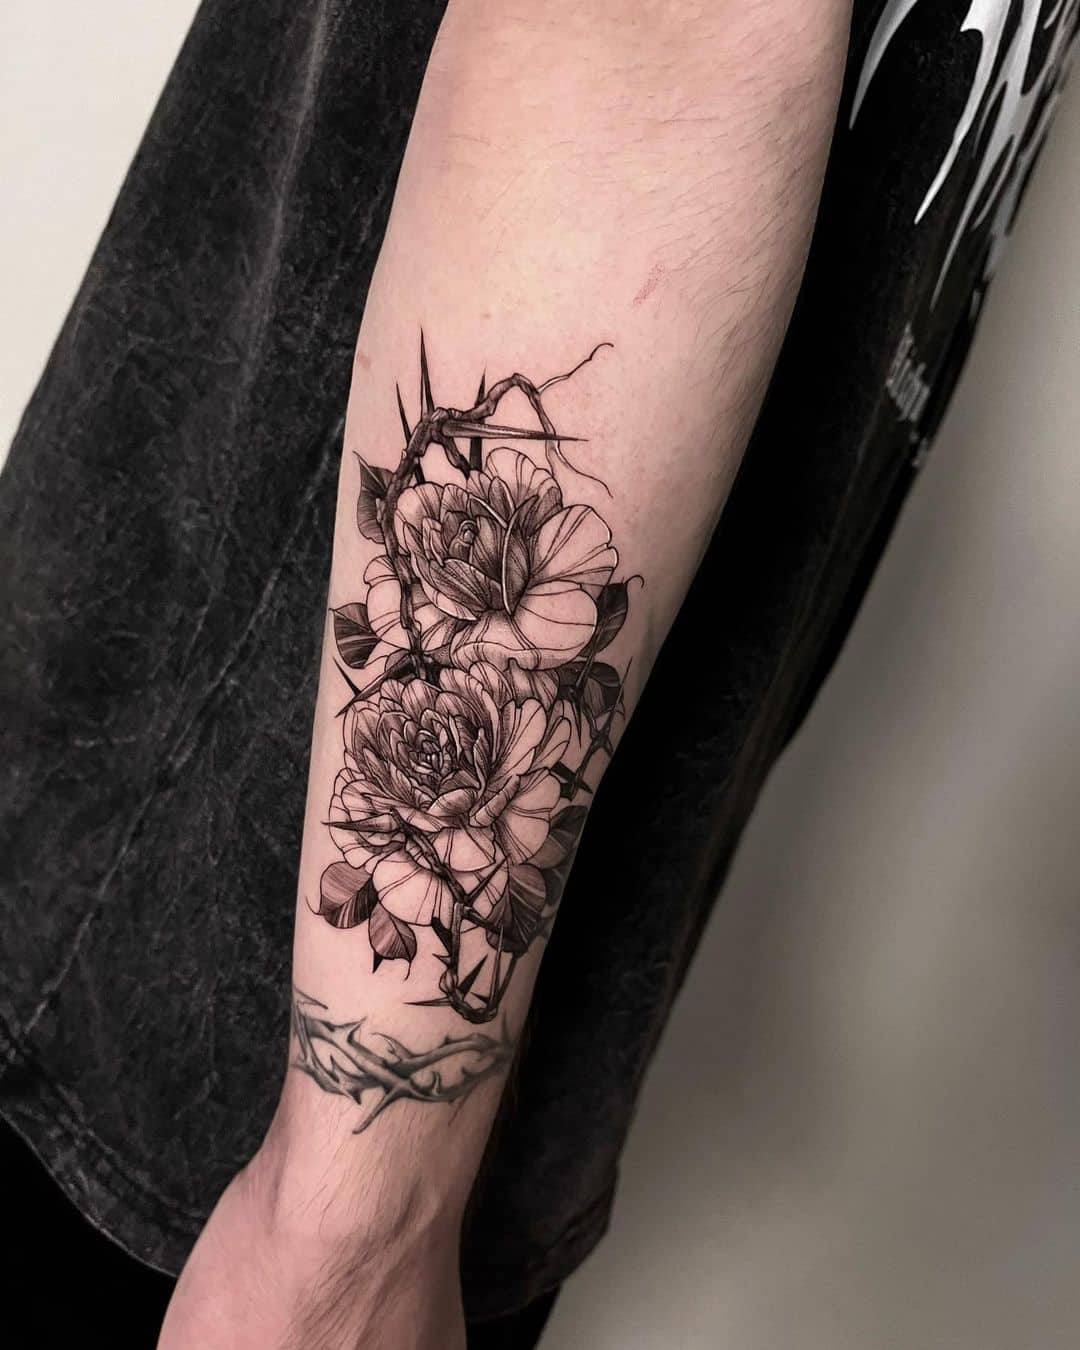 Forearm rose tattoo by abmoon.tattoo